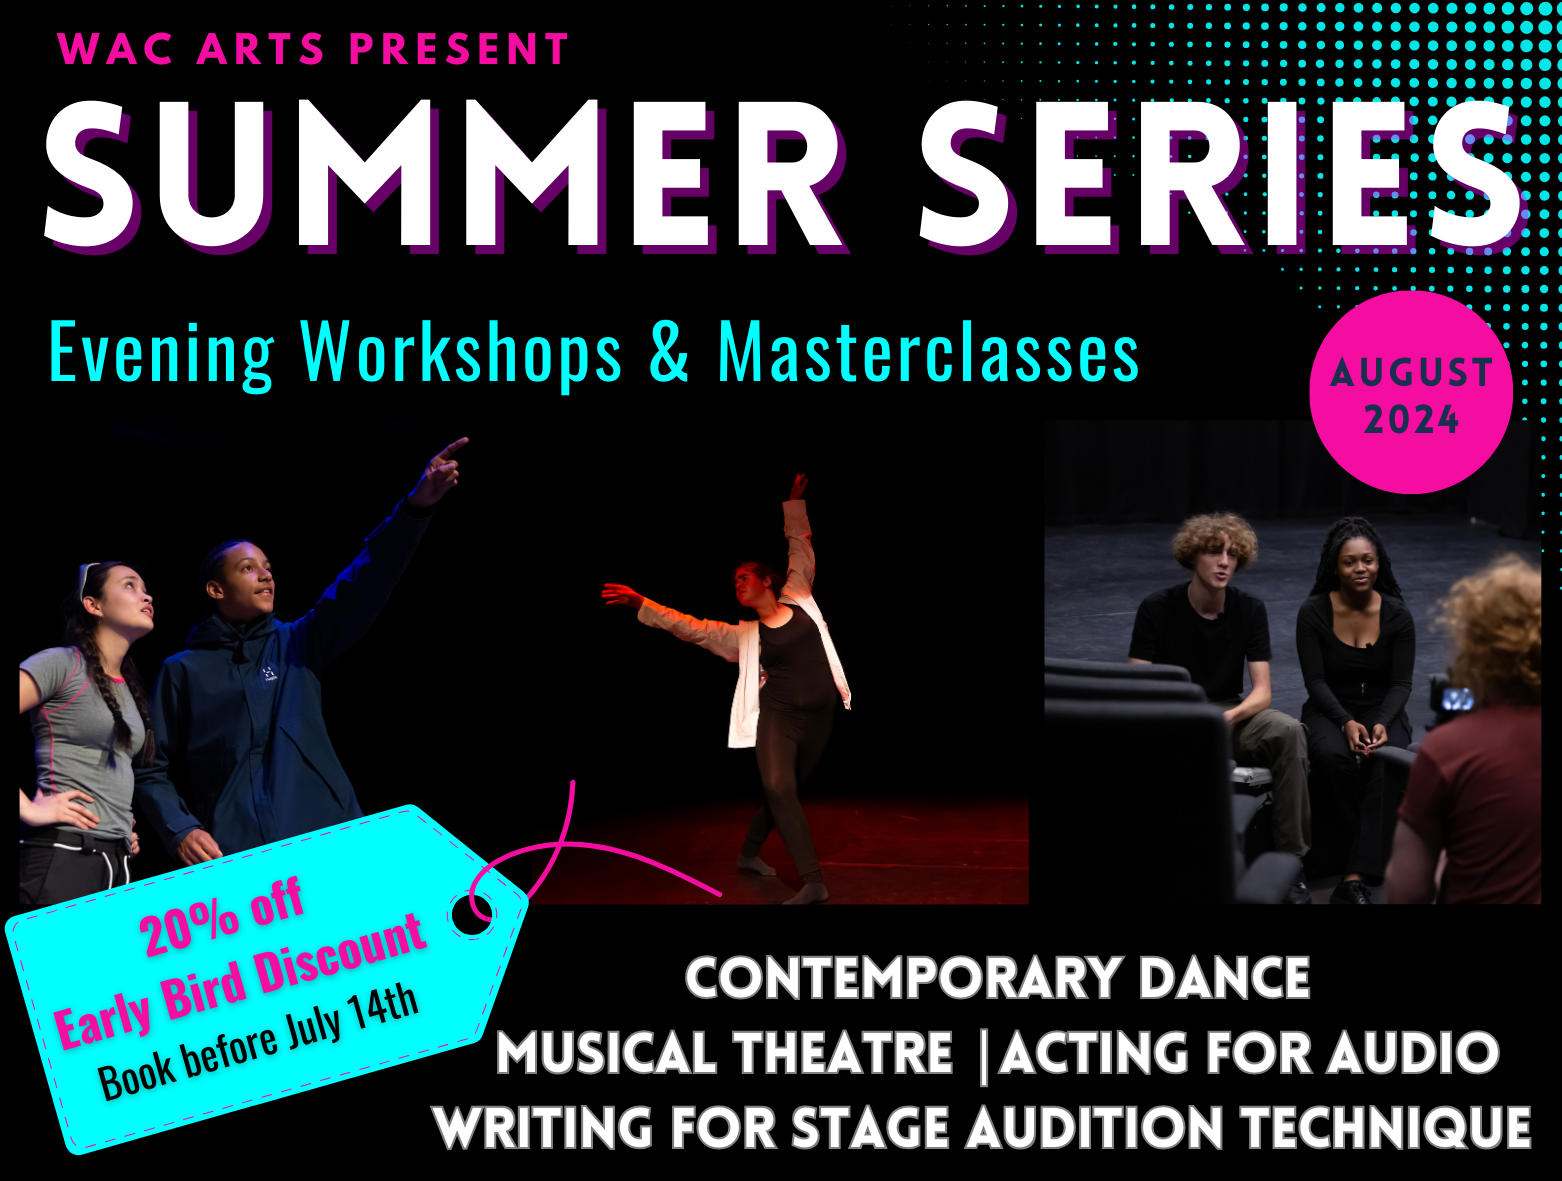 Summer Series

Evening Workshops and Masterclasses